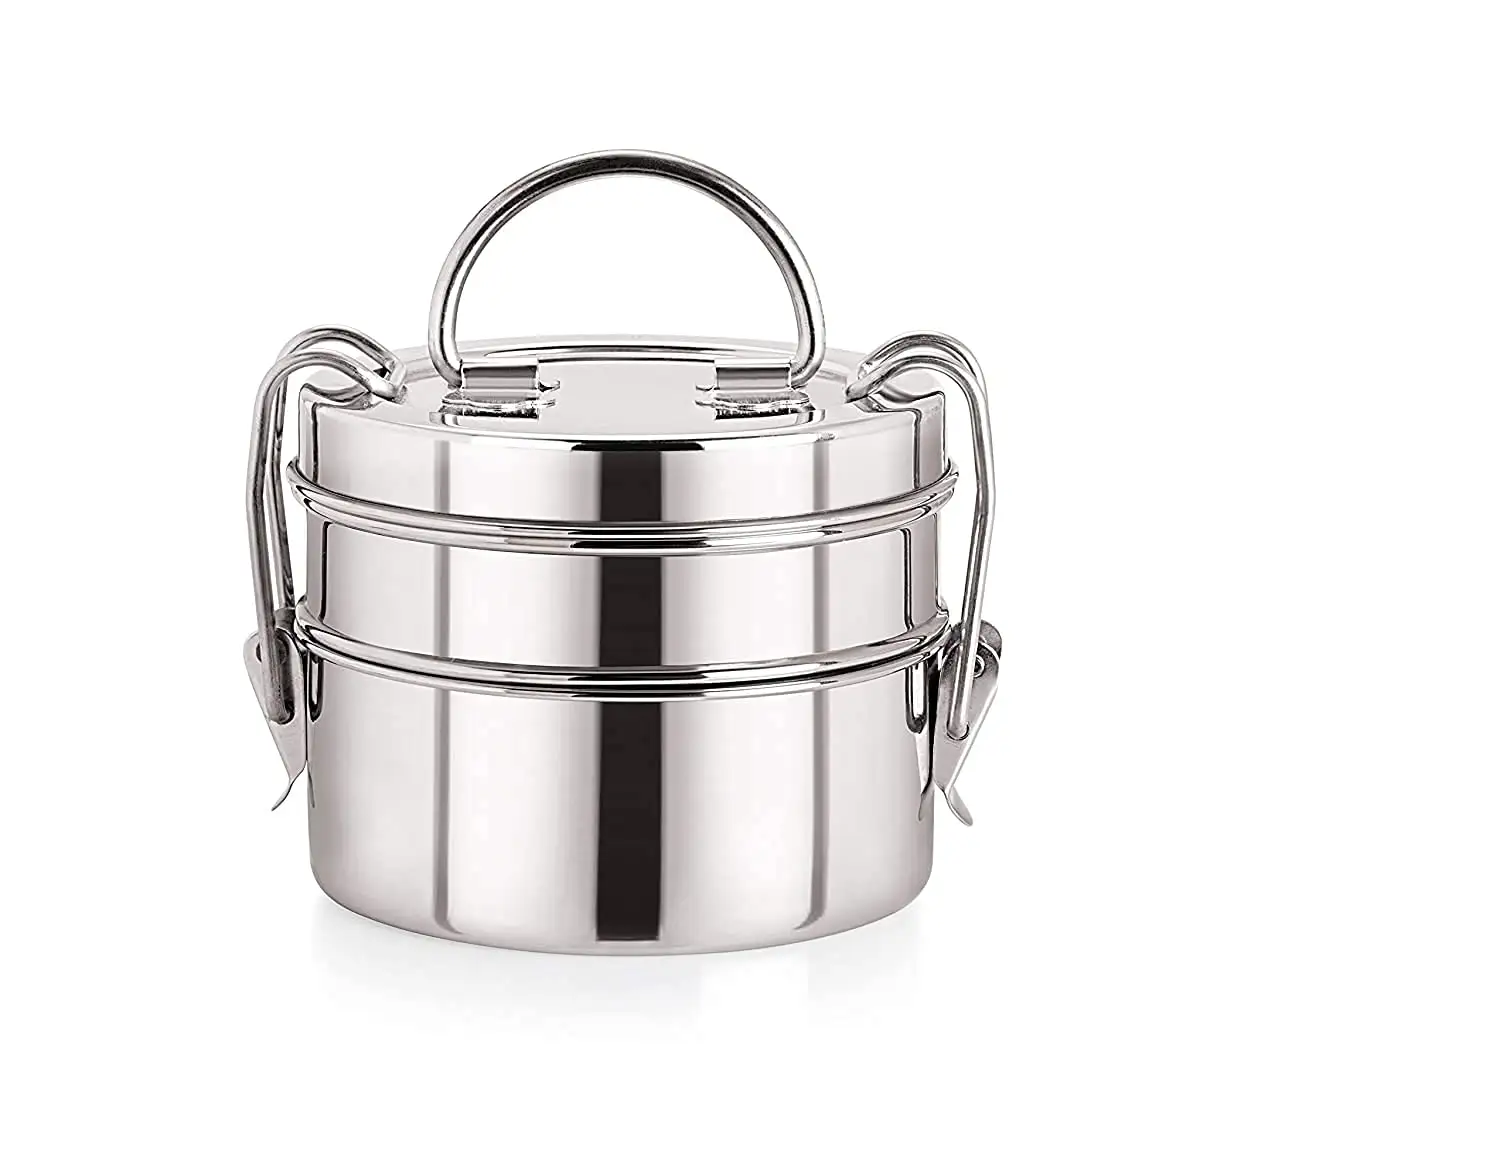 Wholesale Premium Quality Multifunctional Stainless Steel Lock Clip Tiffin Metal Food Container Lunch Box